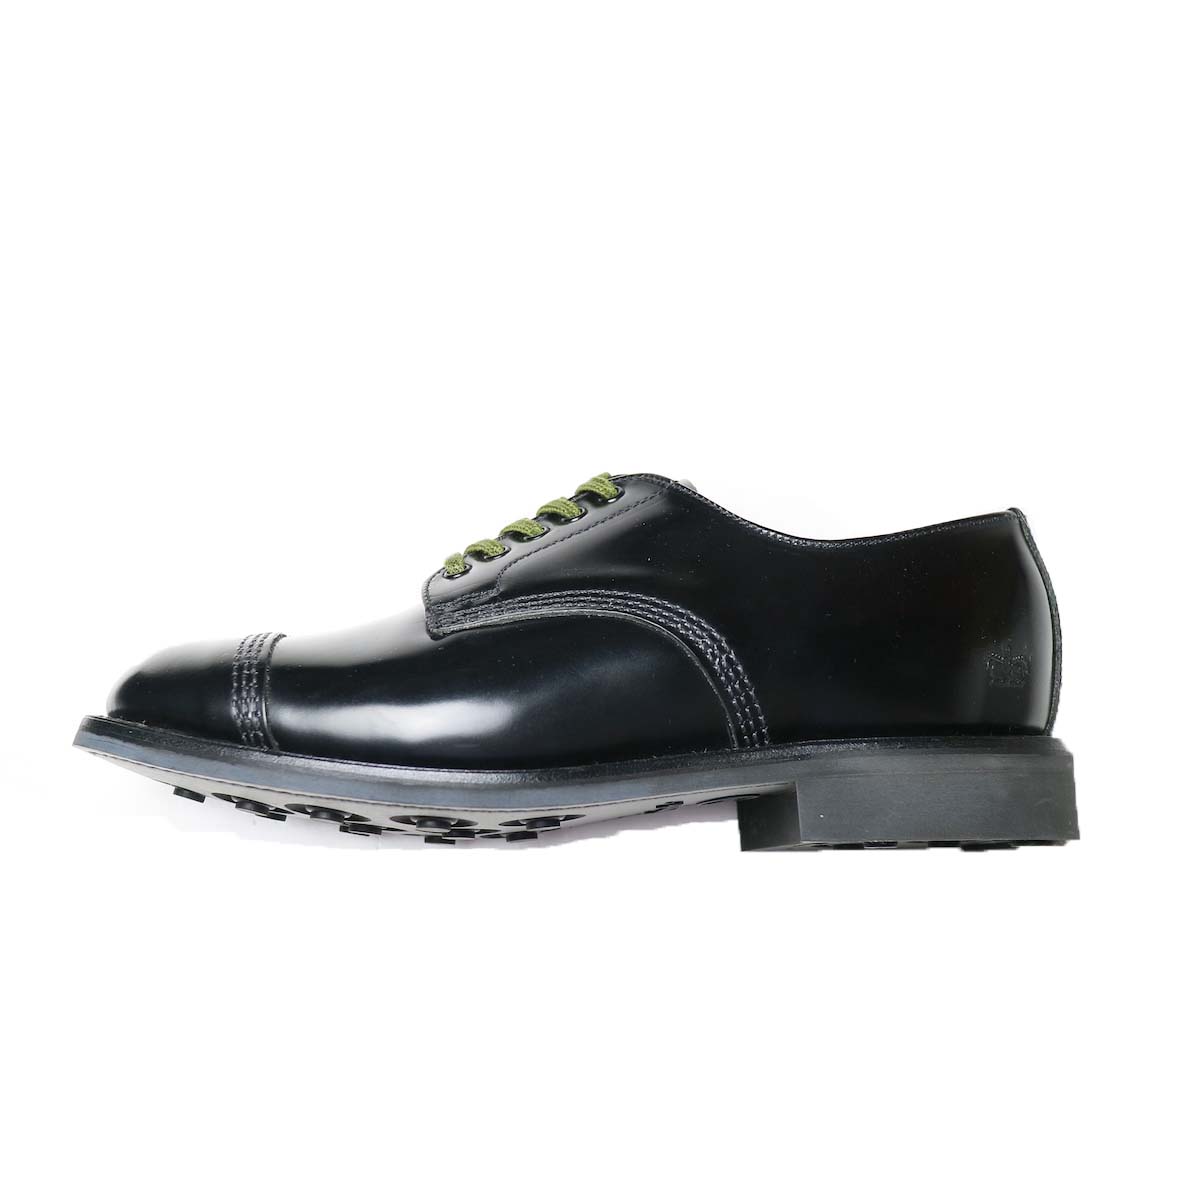 SANDERS / Military Derby Shoe 側面